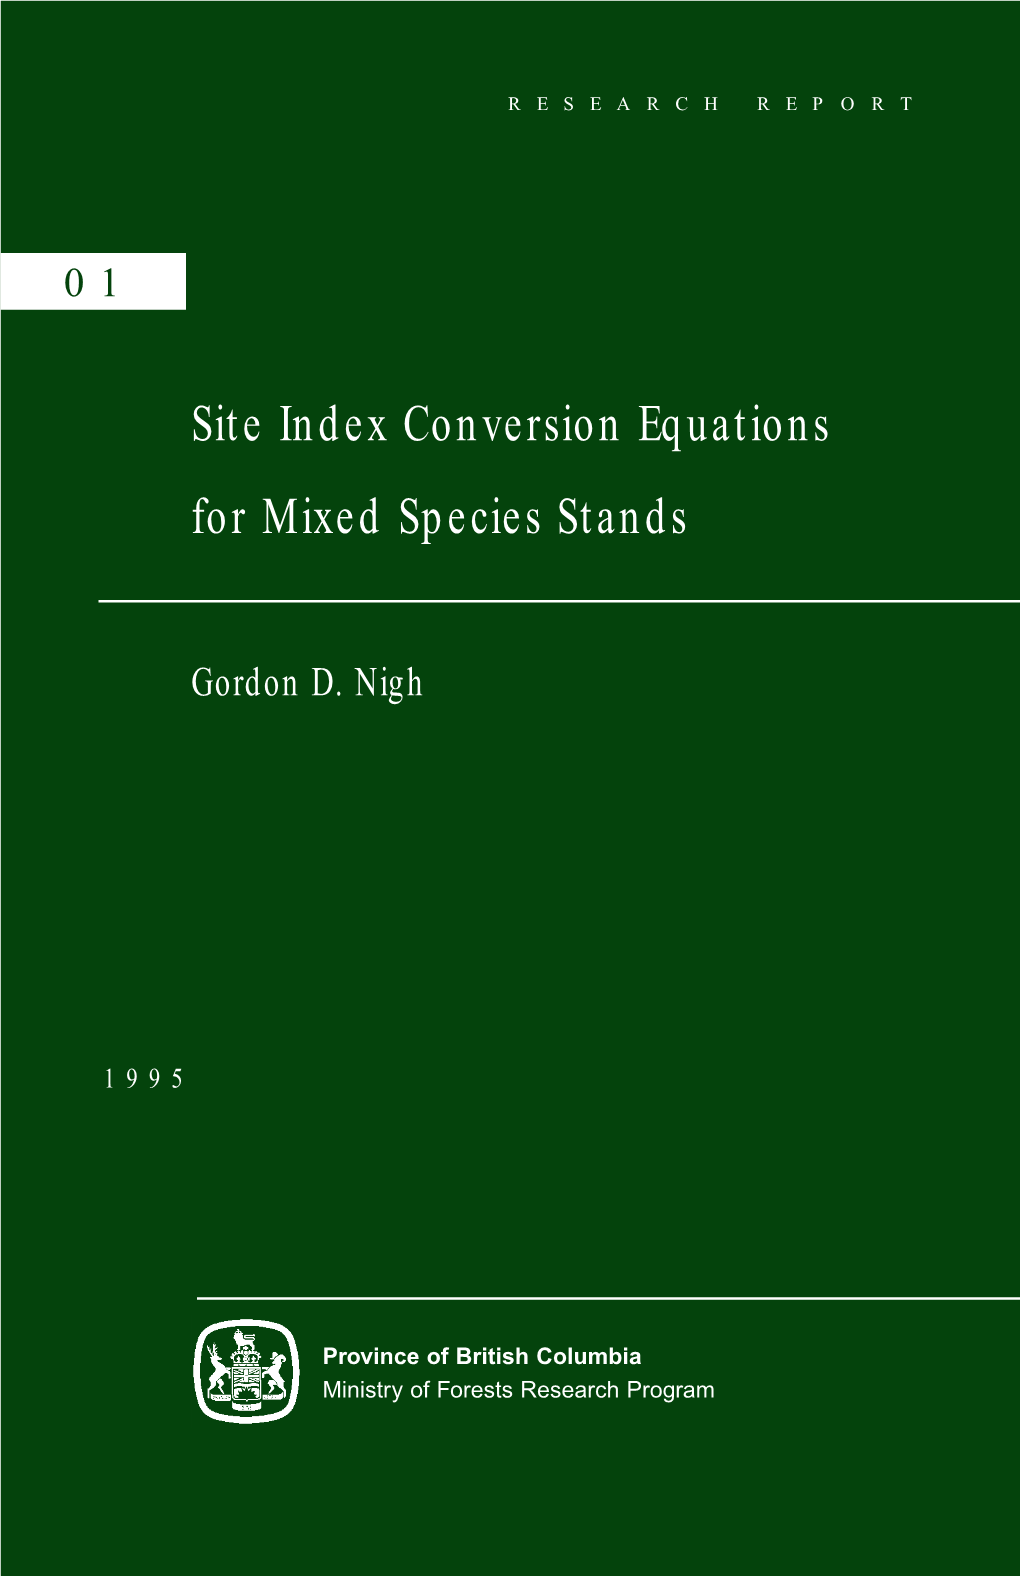 Site Index Conversion Equations for Mixed Species Stands